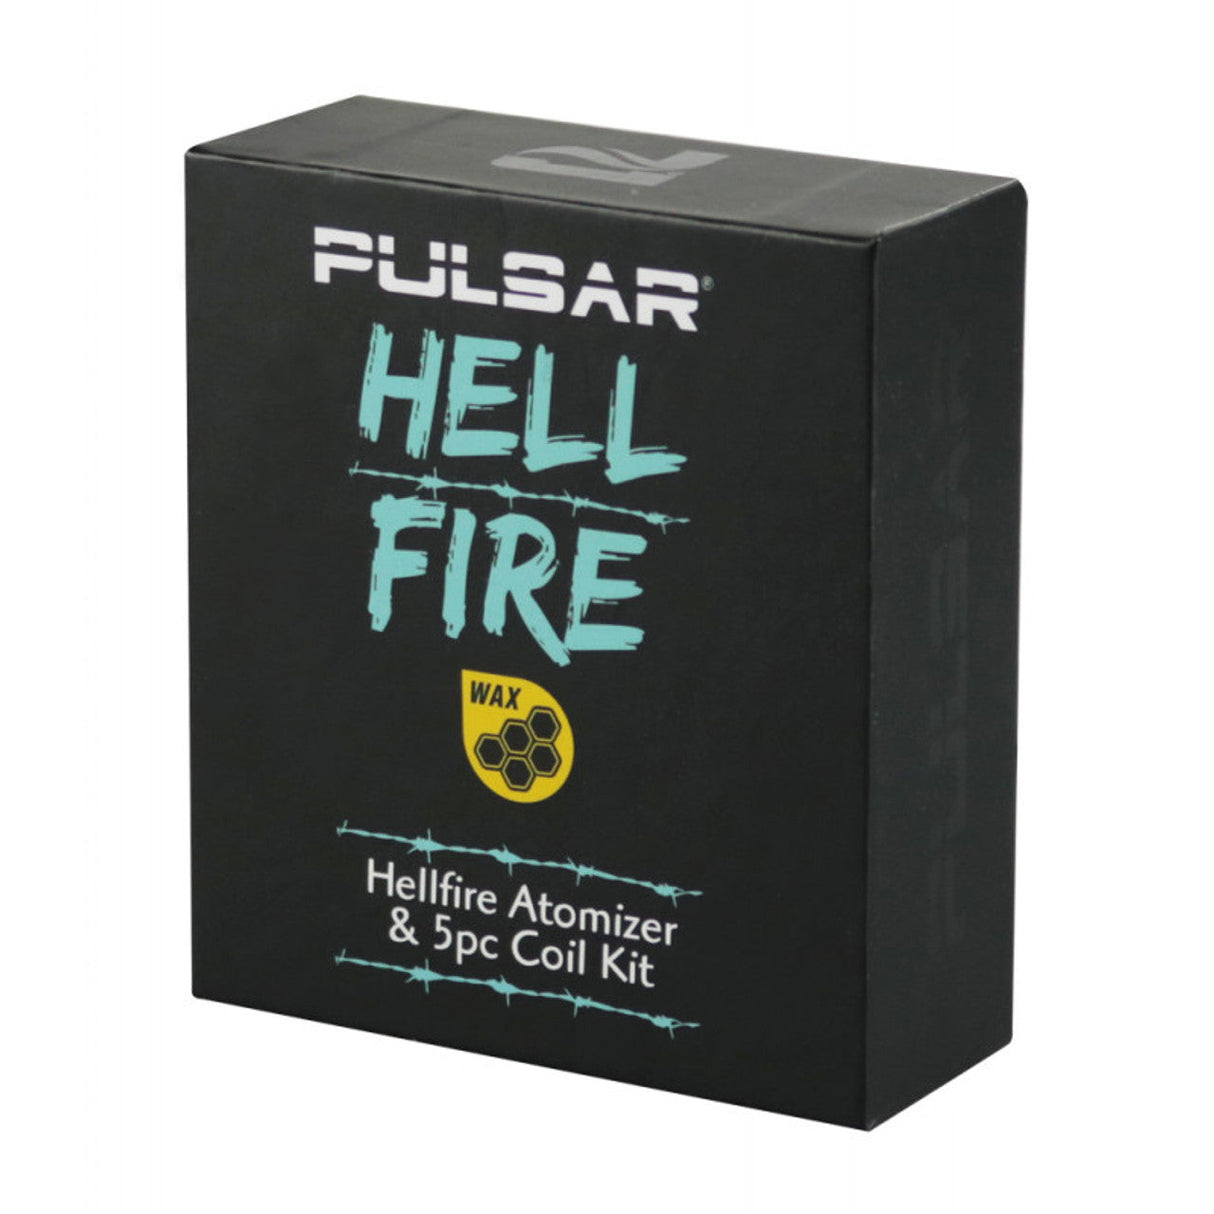 Pulsar Hell Fire Atomizer & 5pc Coil Kit packaging front view on seamless white background